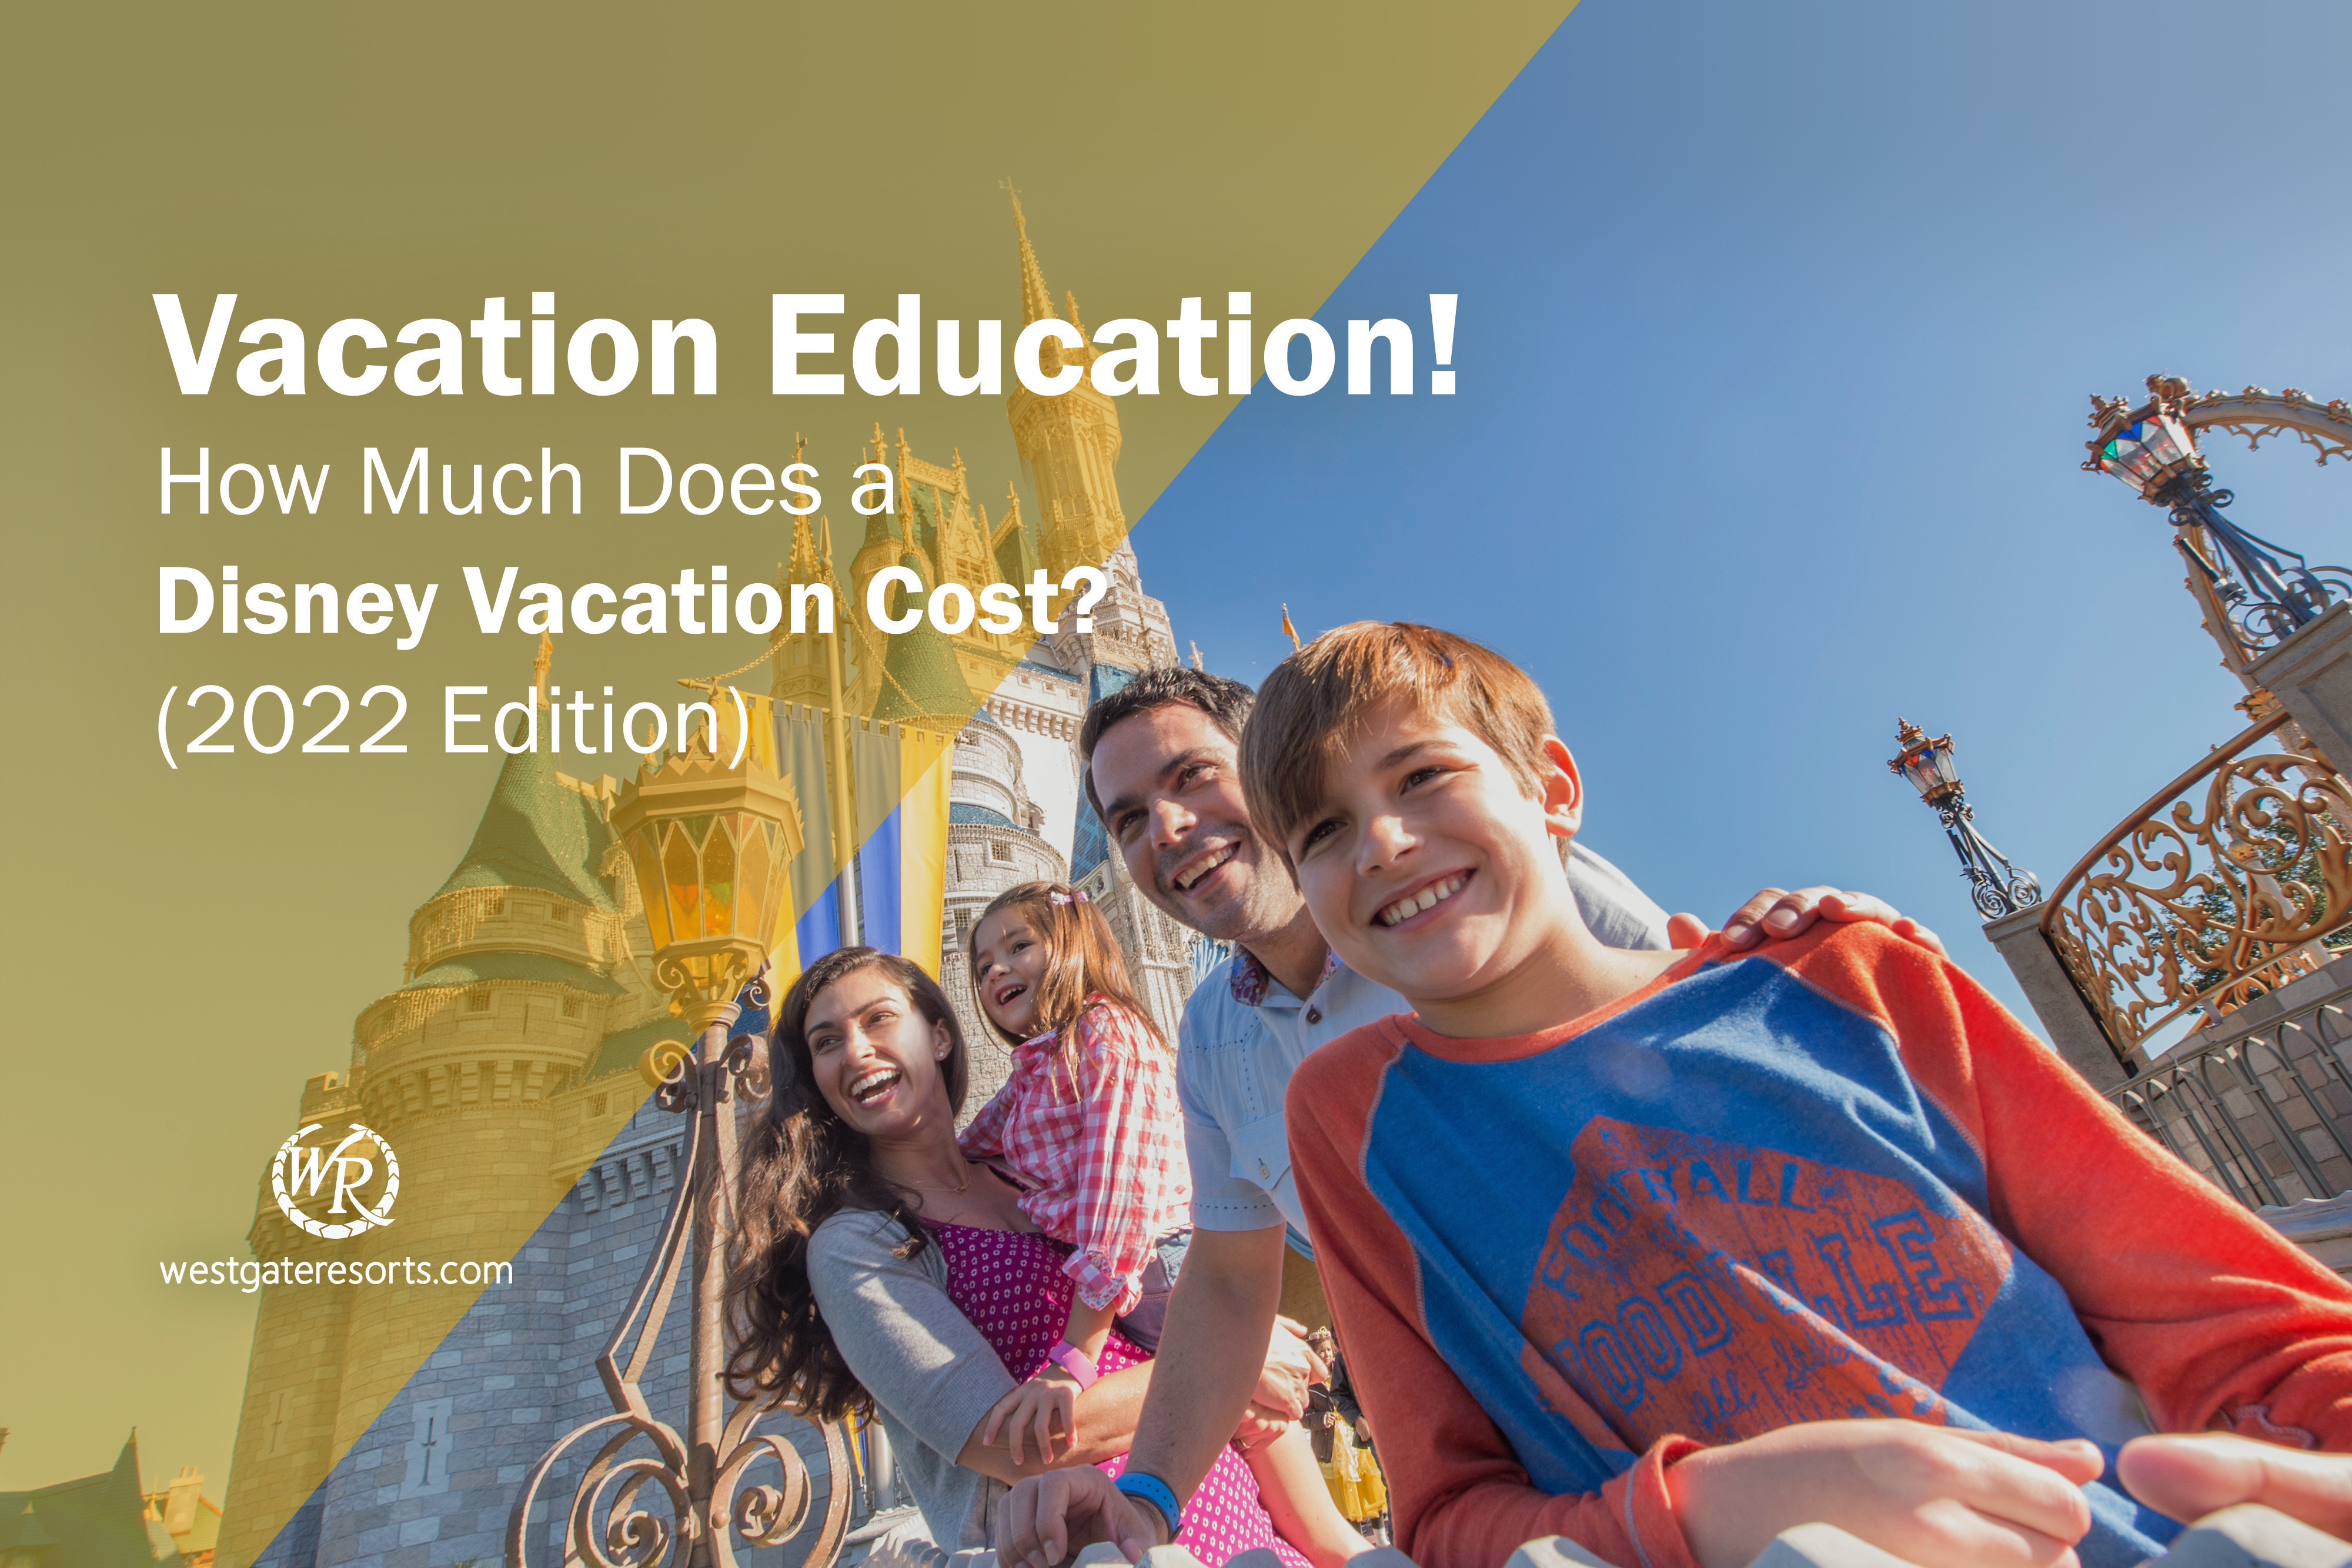 Vacation Education! How Much Does a Disney Vacation Cost (2021 Edition)?